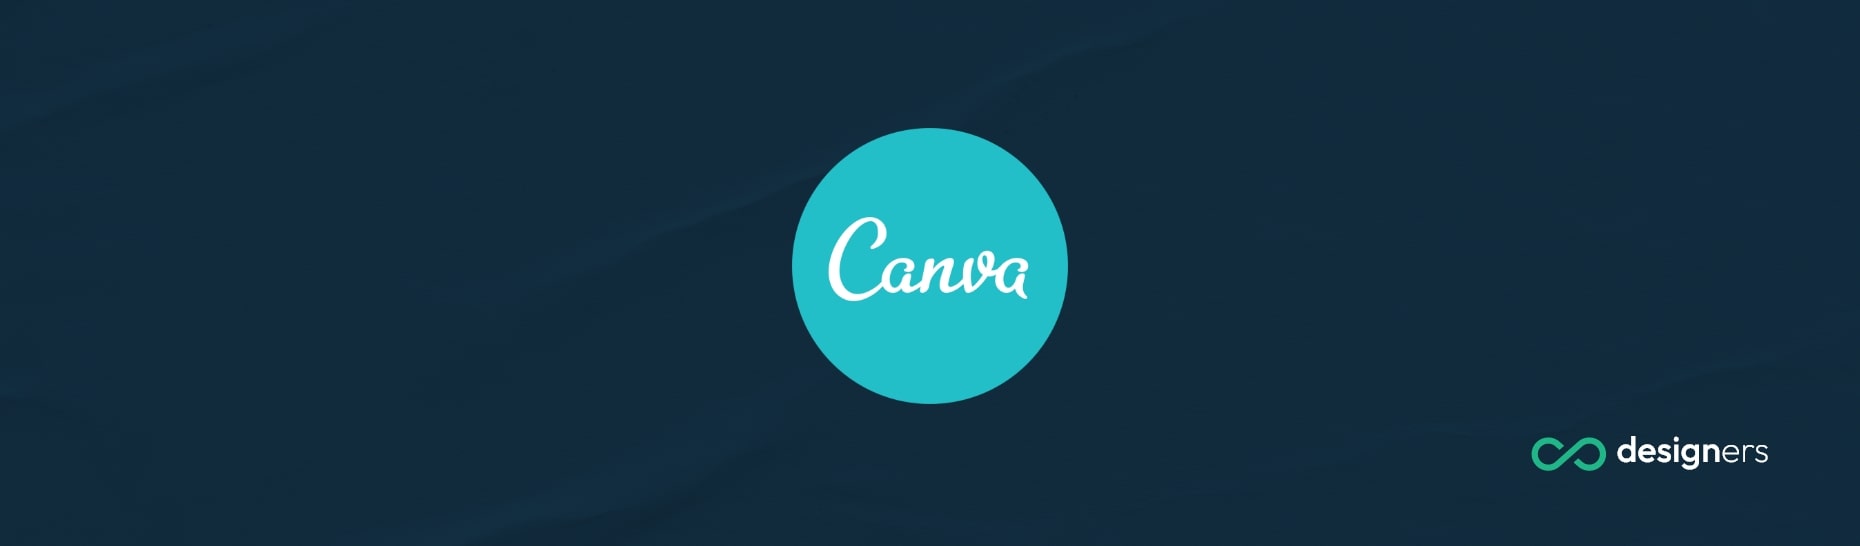 Is Canva Only for Apple?